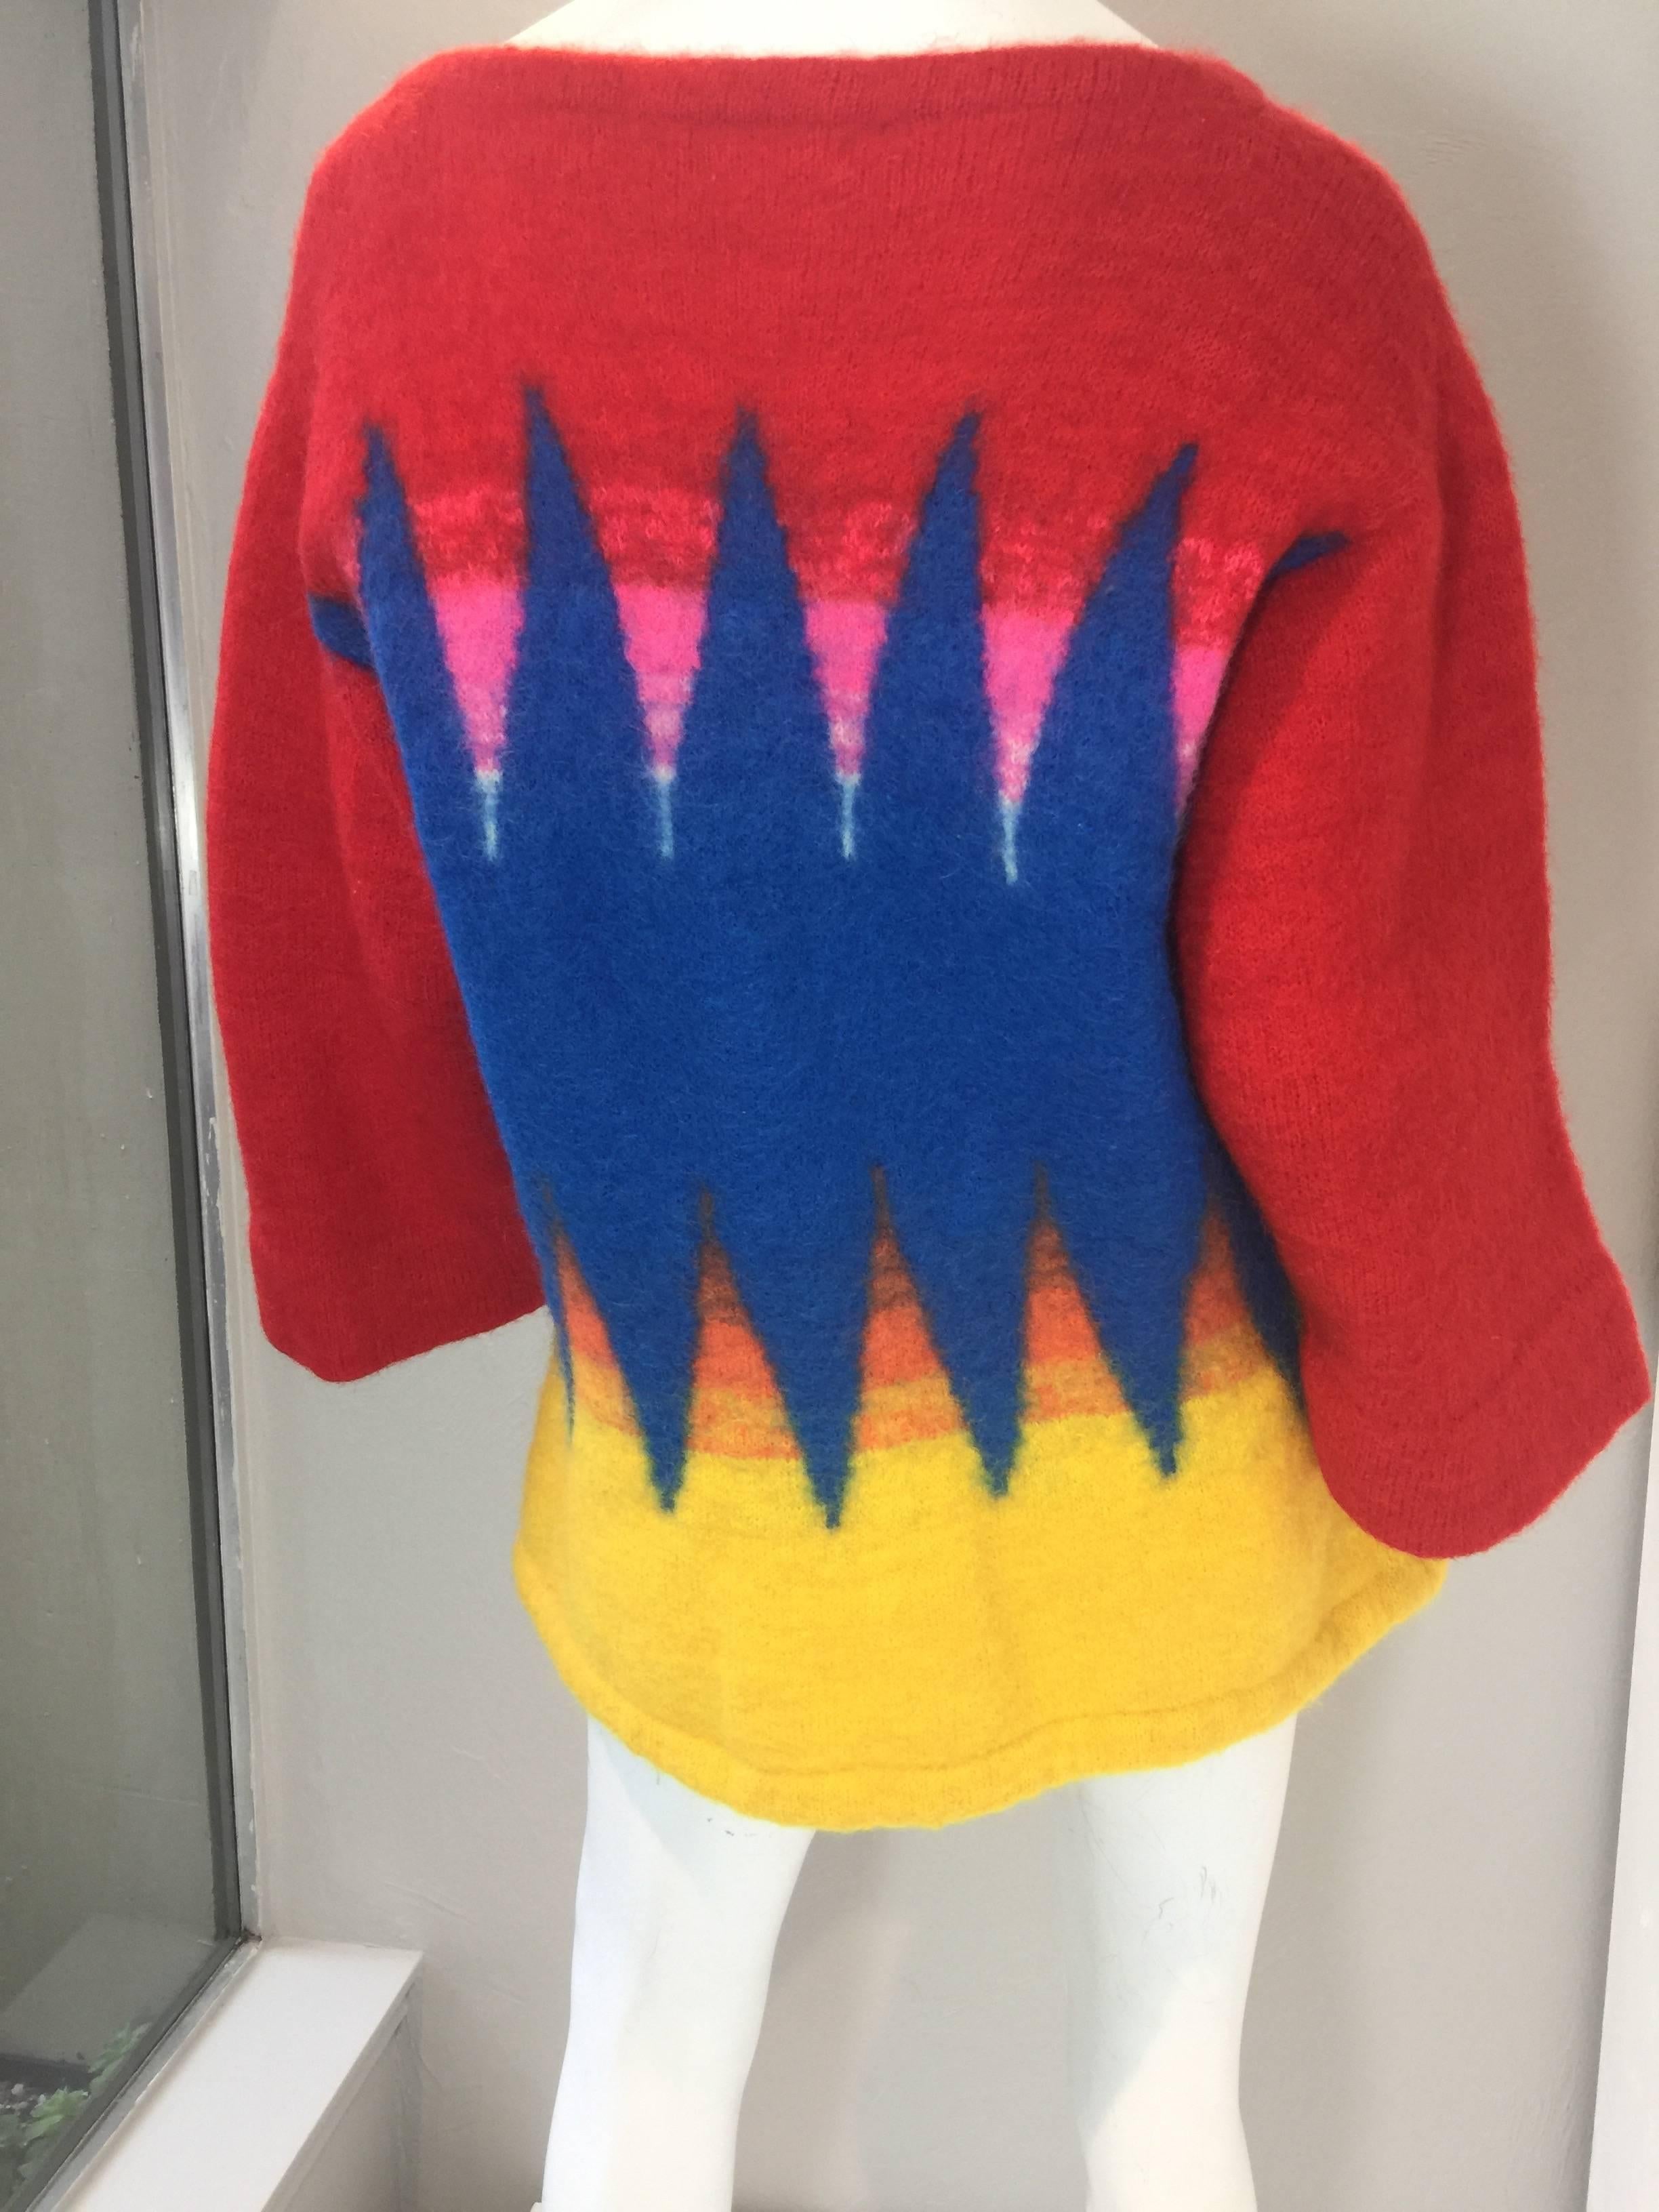 Kansai Yamamoto Boiled Wool Sweater with Bold Graphic Print in Primary Colors

Excellent condition. Fabric content 77% wool, 23% mohair. Made in Japan. Crew neck, long sleeve and drawstring waist.  

Measurements: 
Shoulder - 20